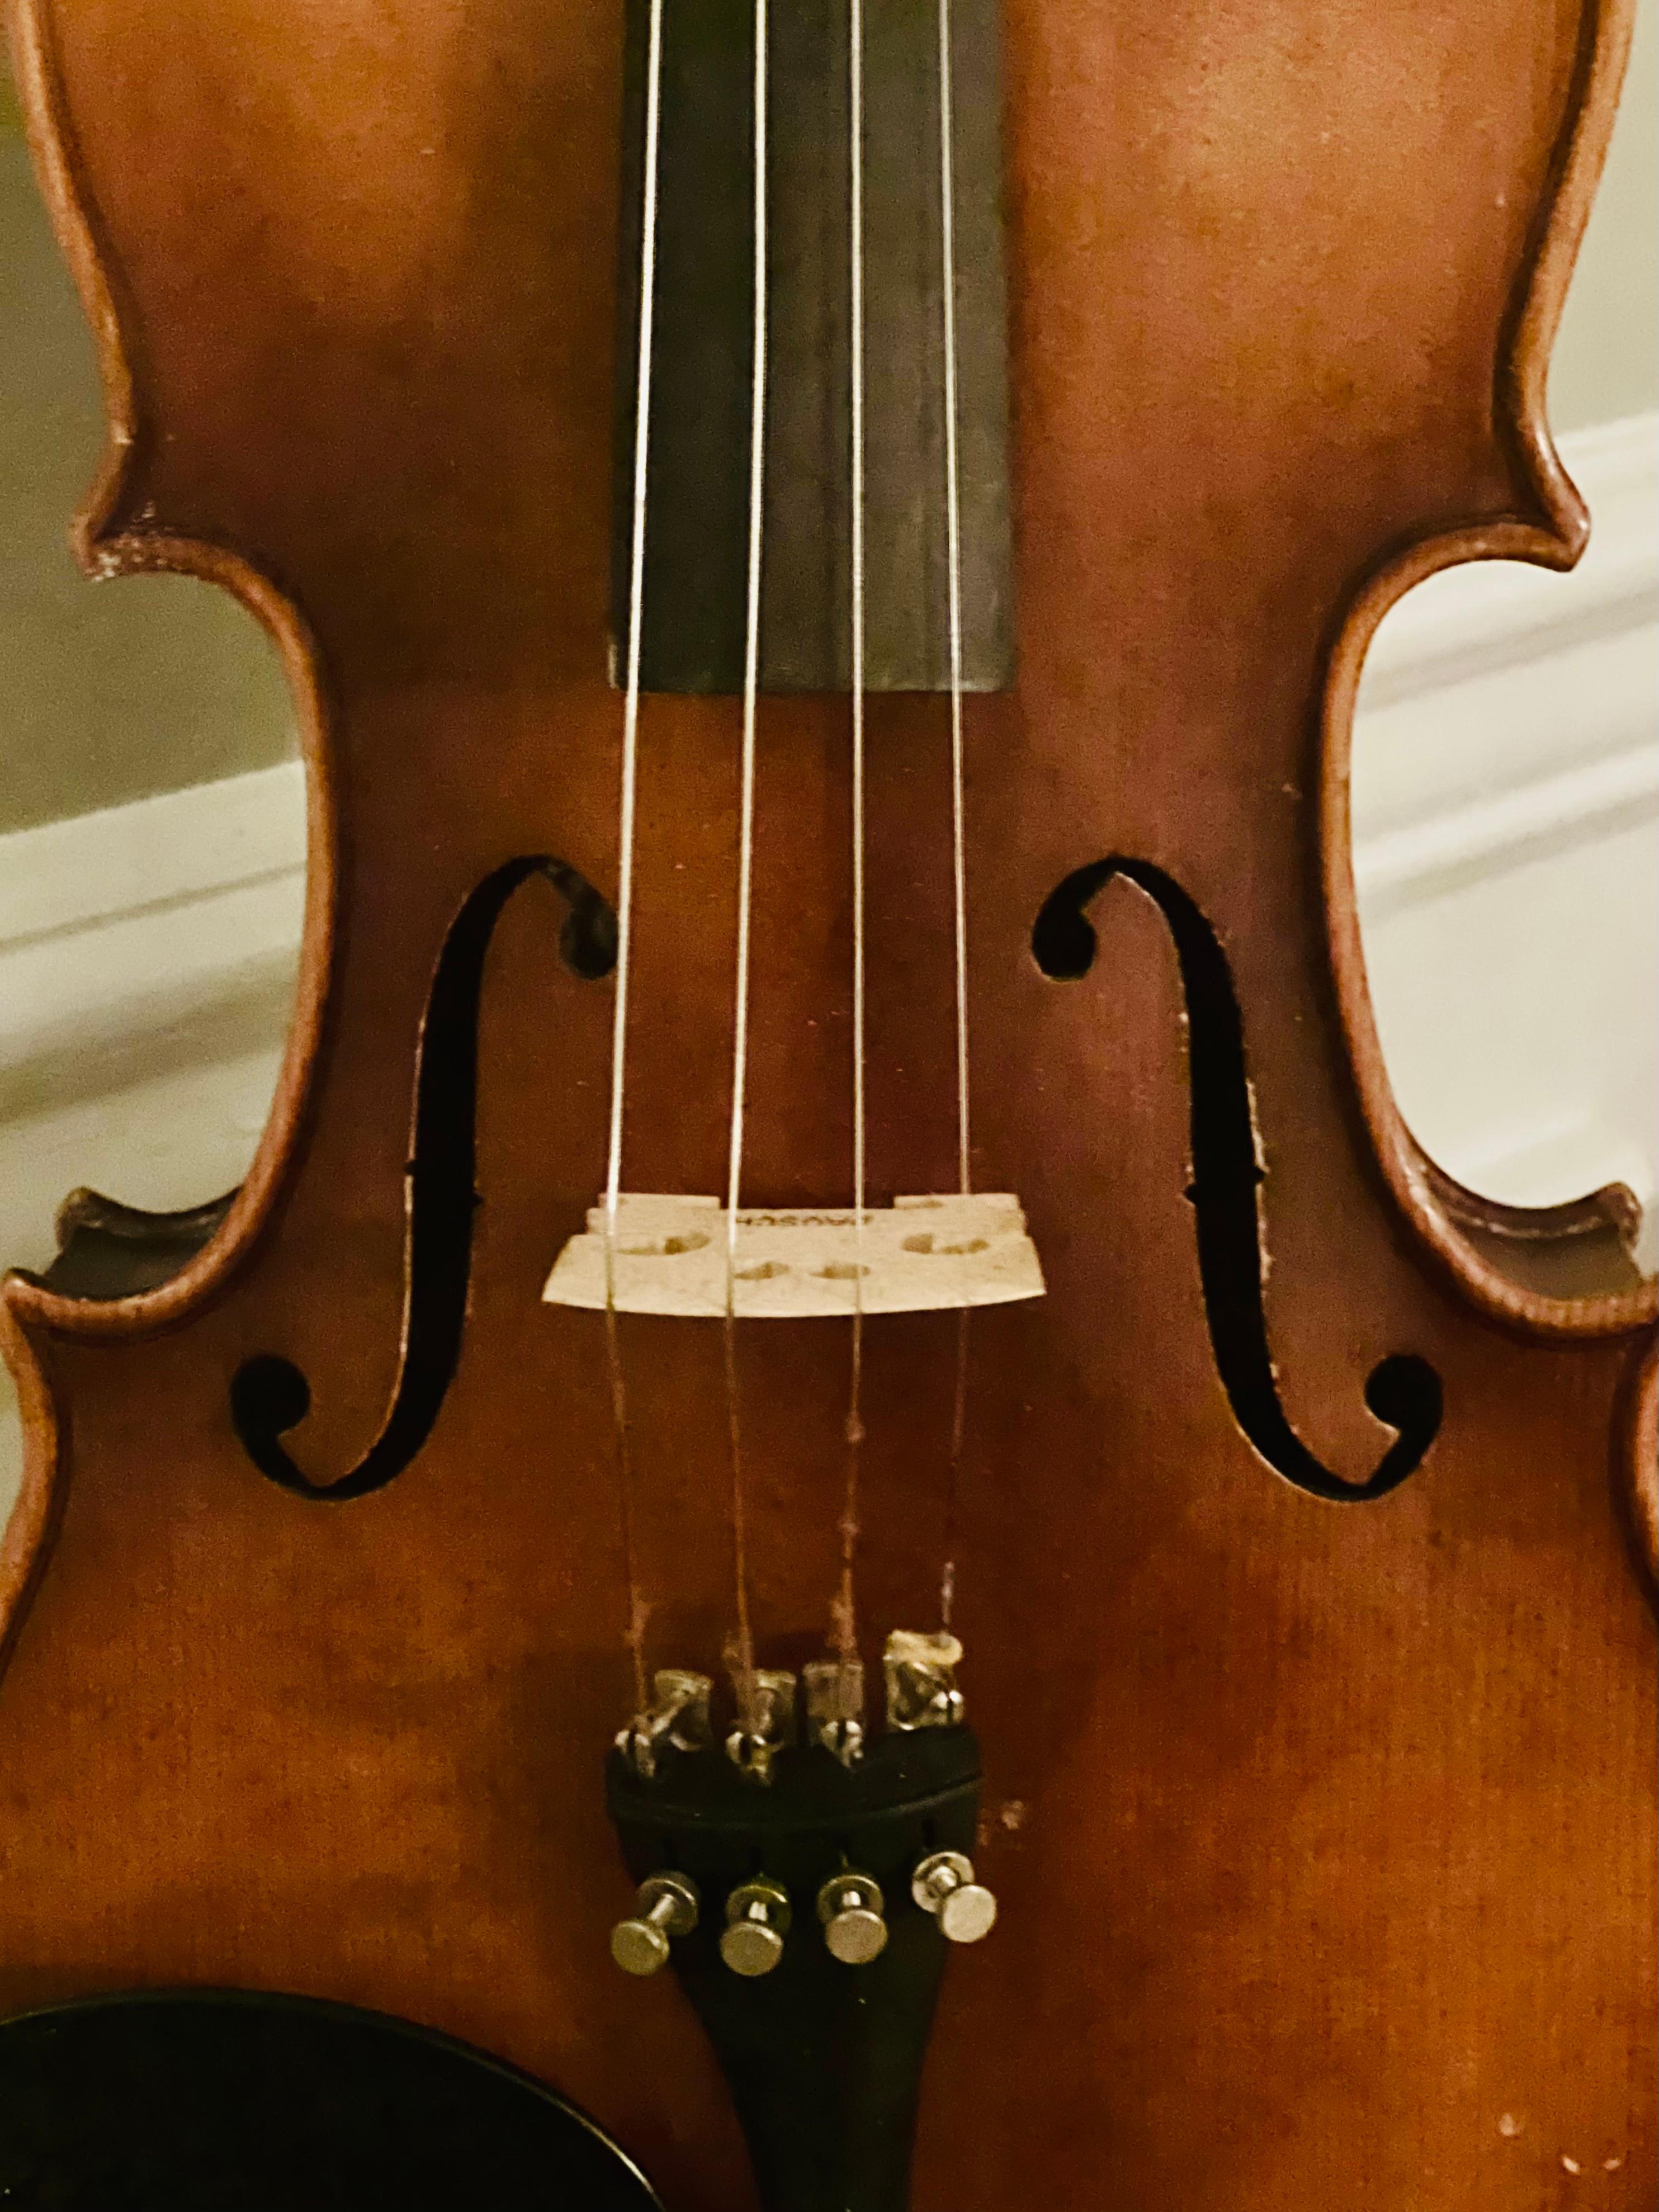 1970 3/4 E.R. Pfretzschner Hand-Crafted Violin in the Style of A. Stradivarius In Good Condition For Sale In Doylestown, PA